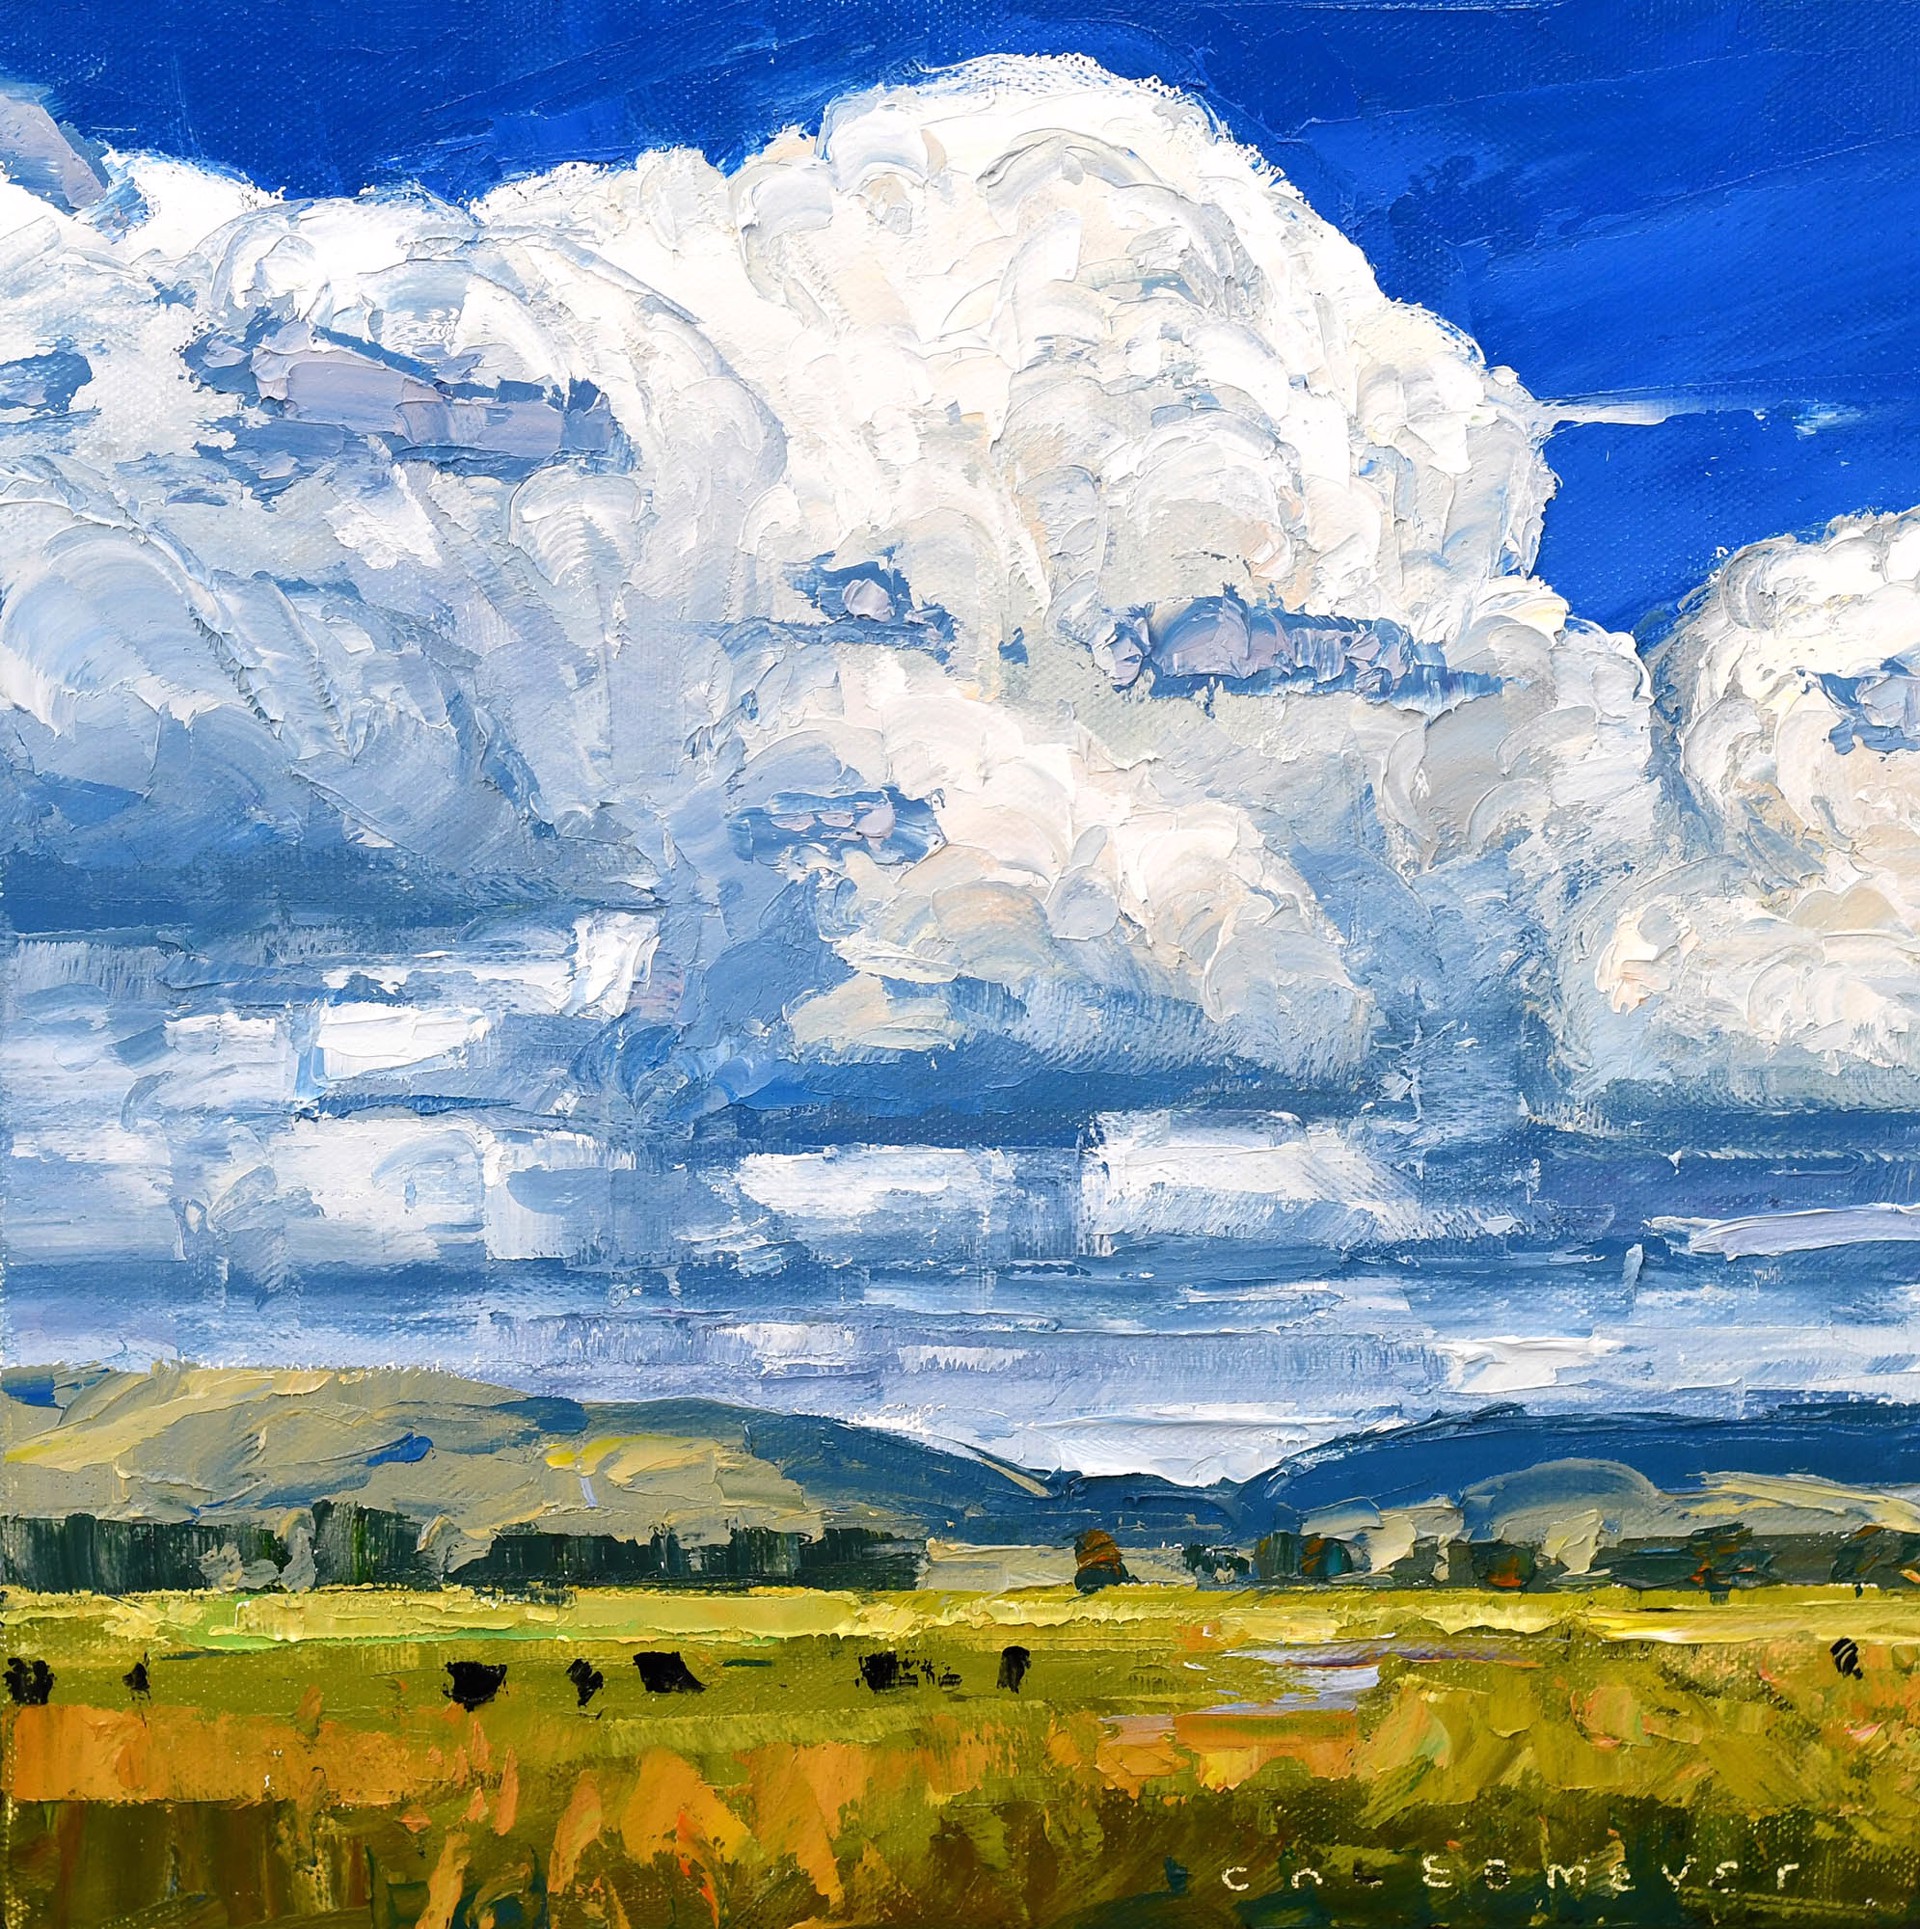 Original Oil Painting Featuring A Summer Mountain Landscape With Big Clouds And Blue Sky